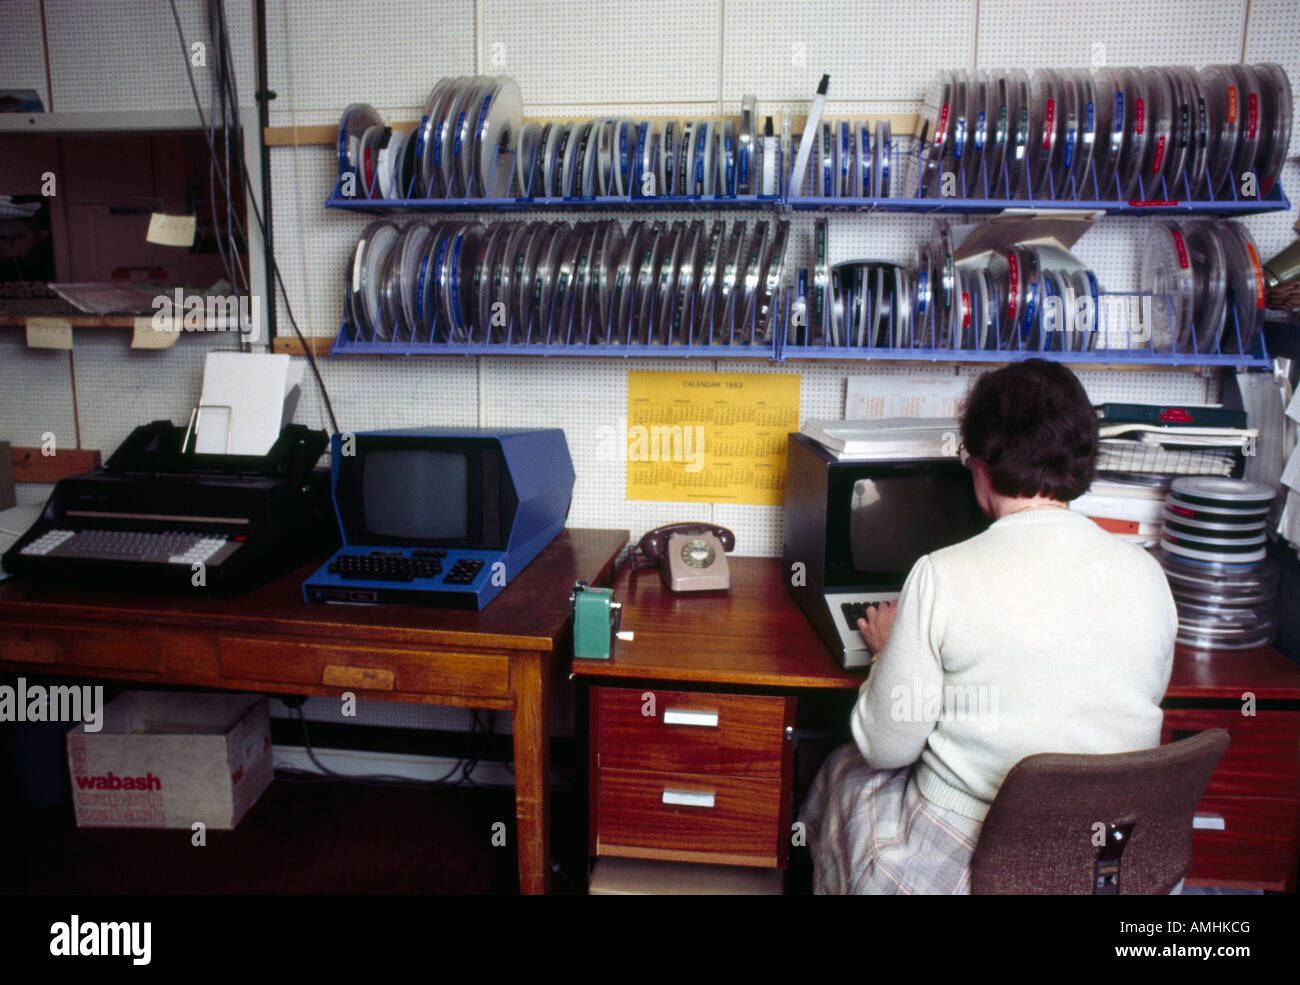 Vintage Photos of Computer Labs